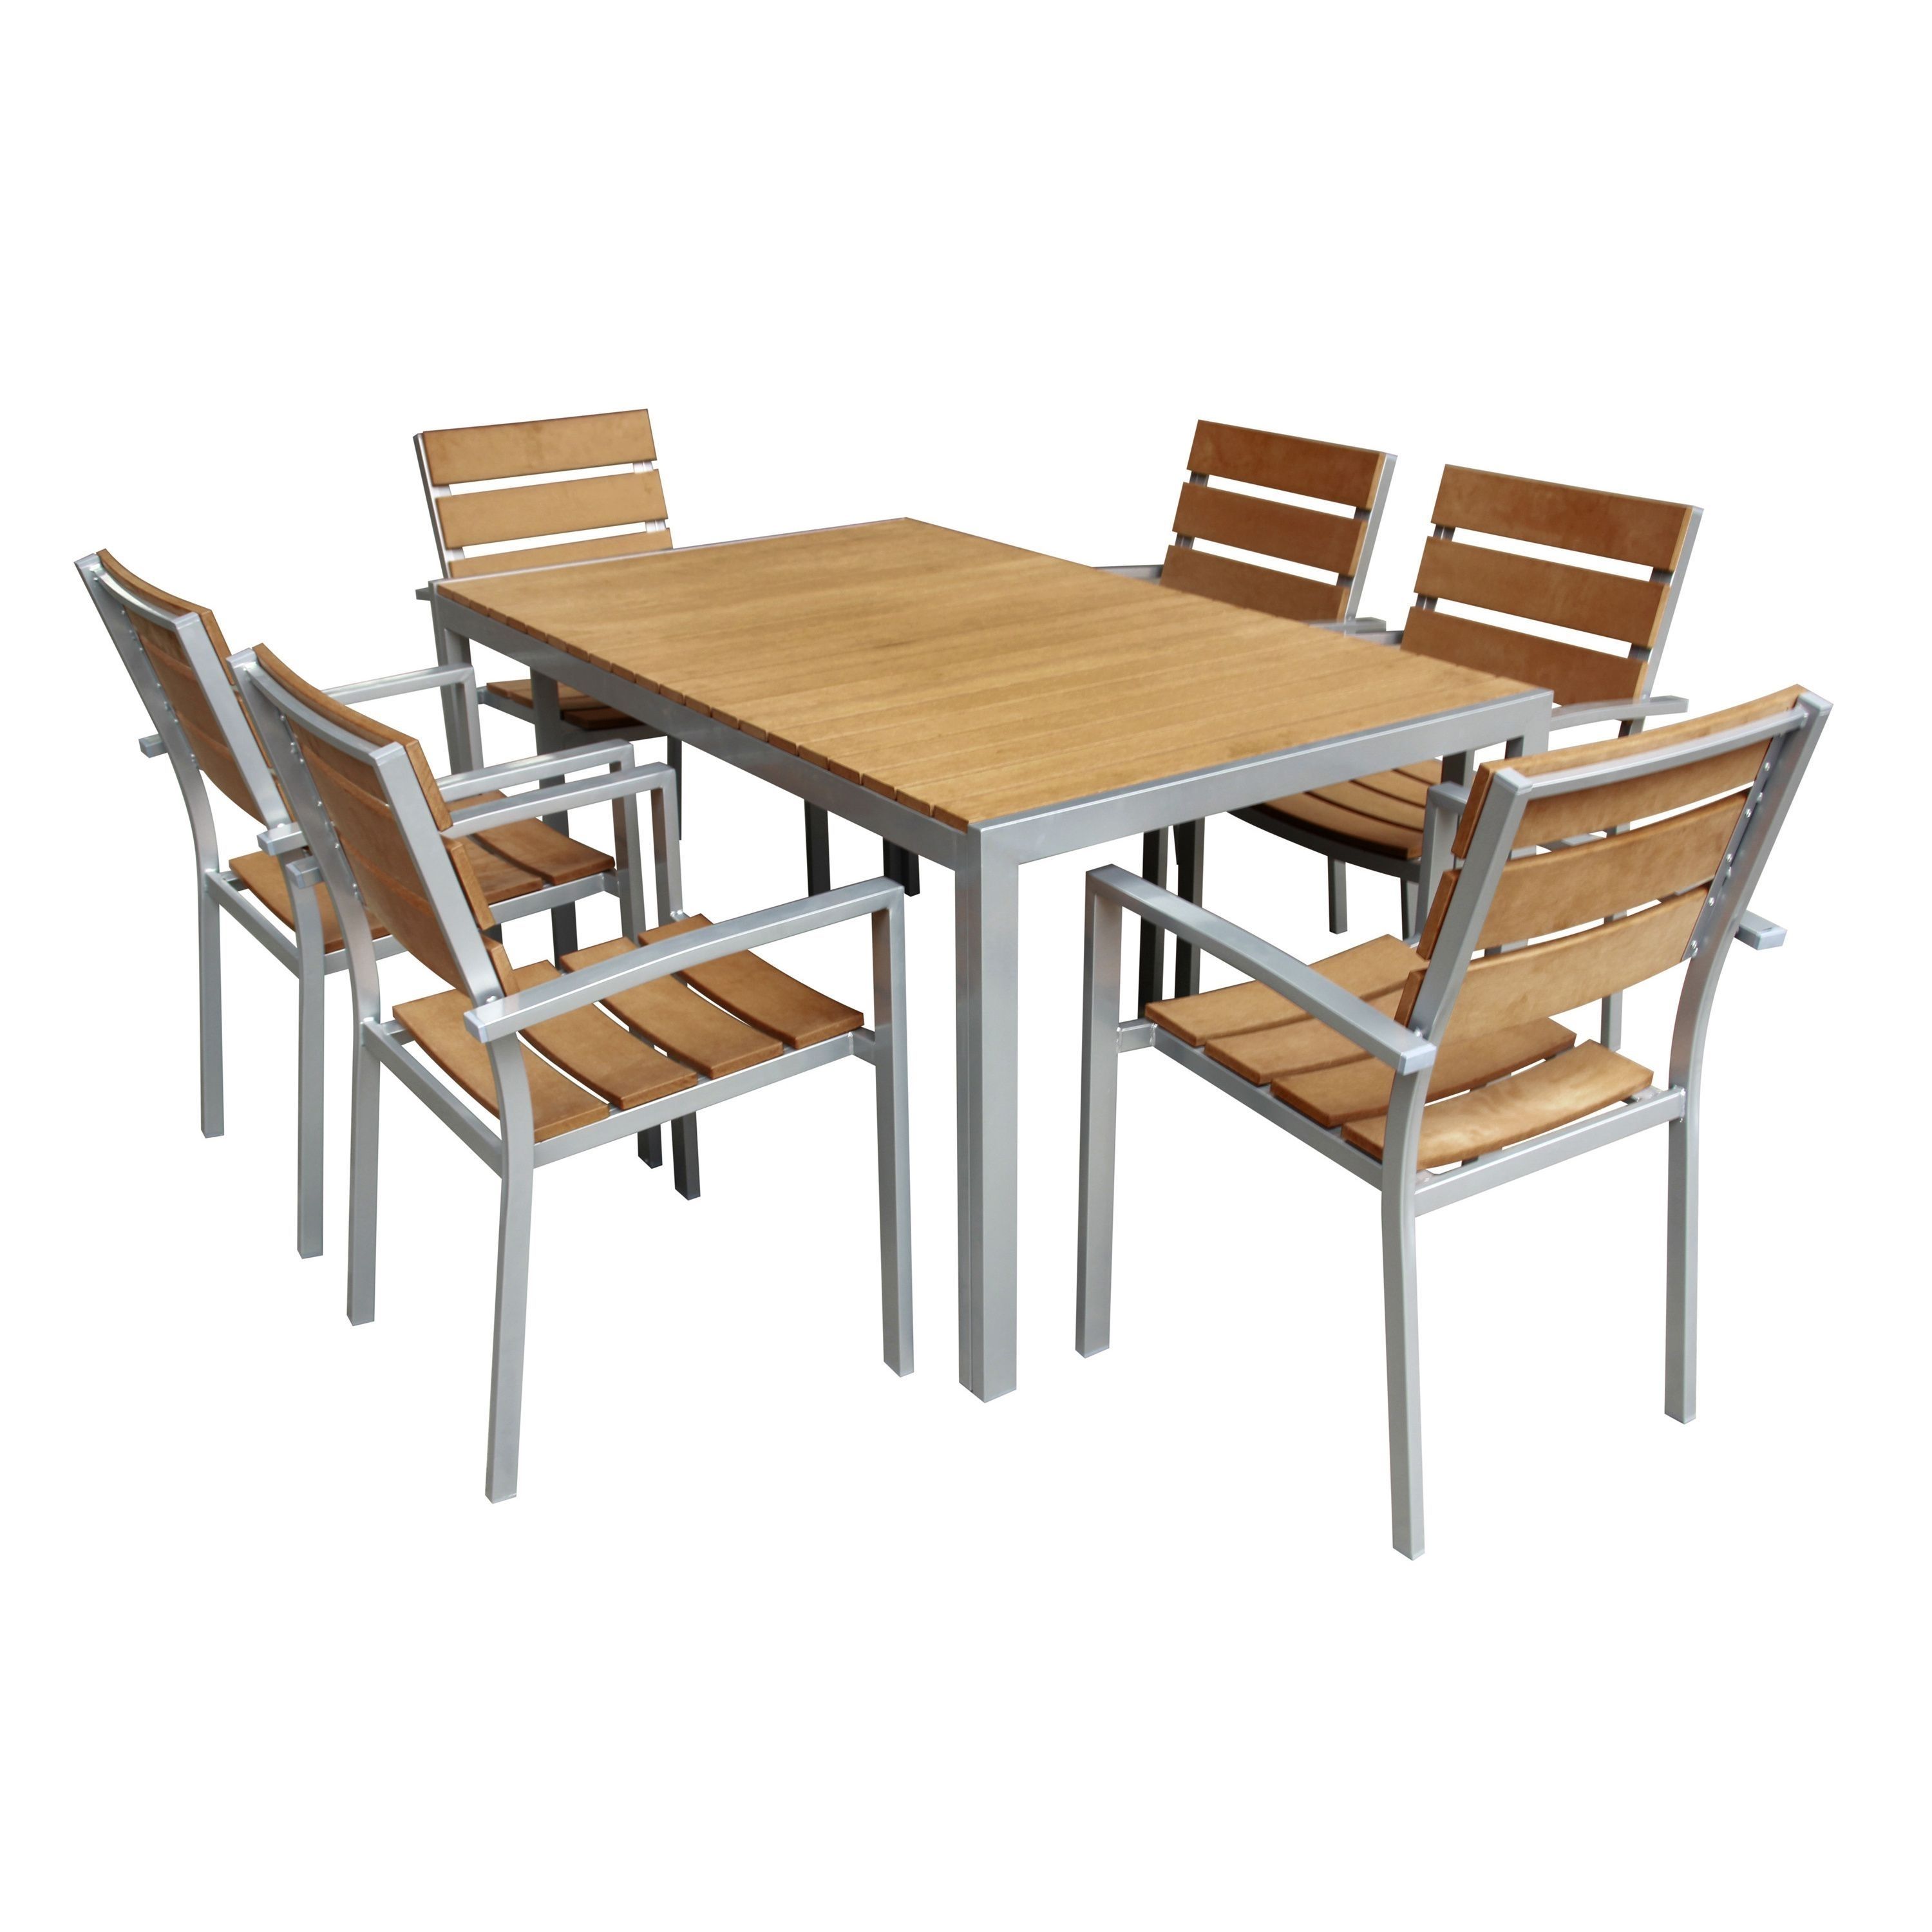 Add A Classic Touch To Your Patio With This Striking 7 Piece Dinging Pertaining To Newest Delfina 7 Piece Dining Sets (View 15 of 20)